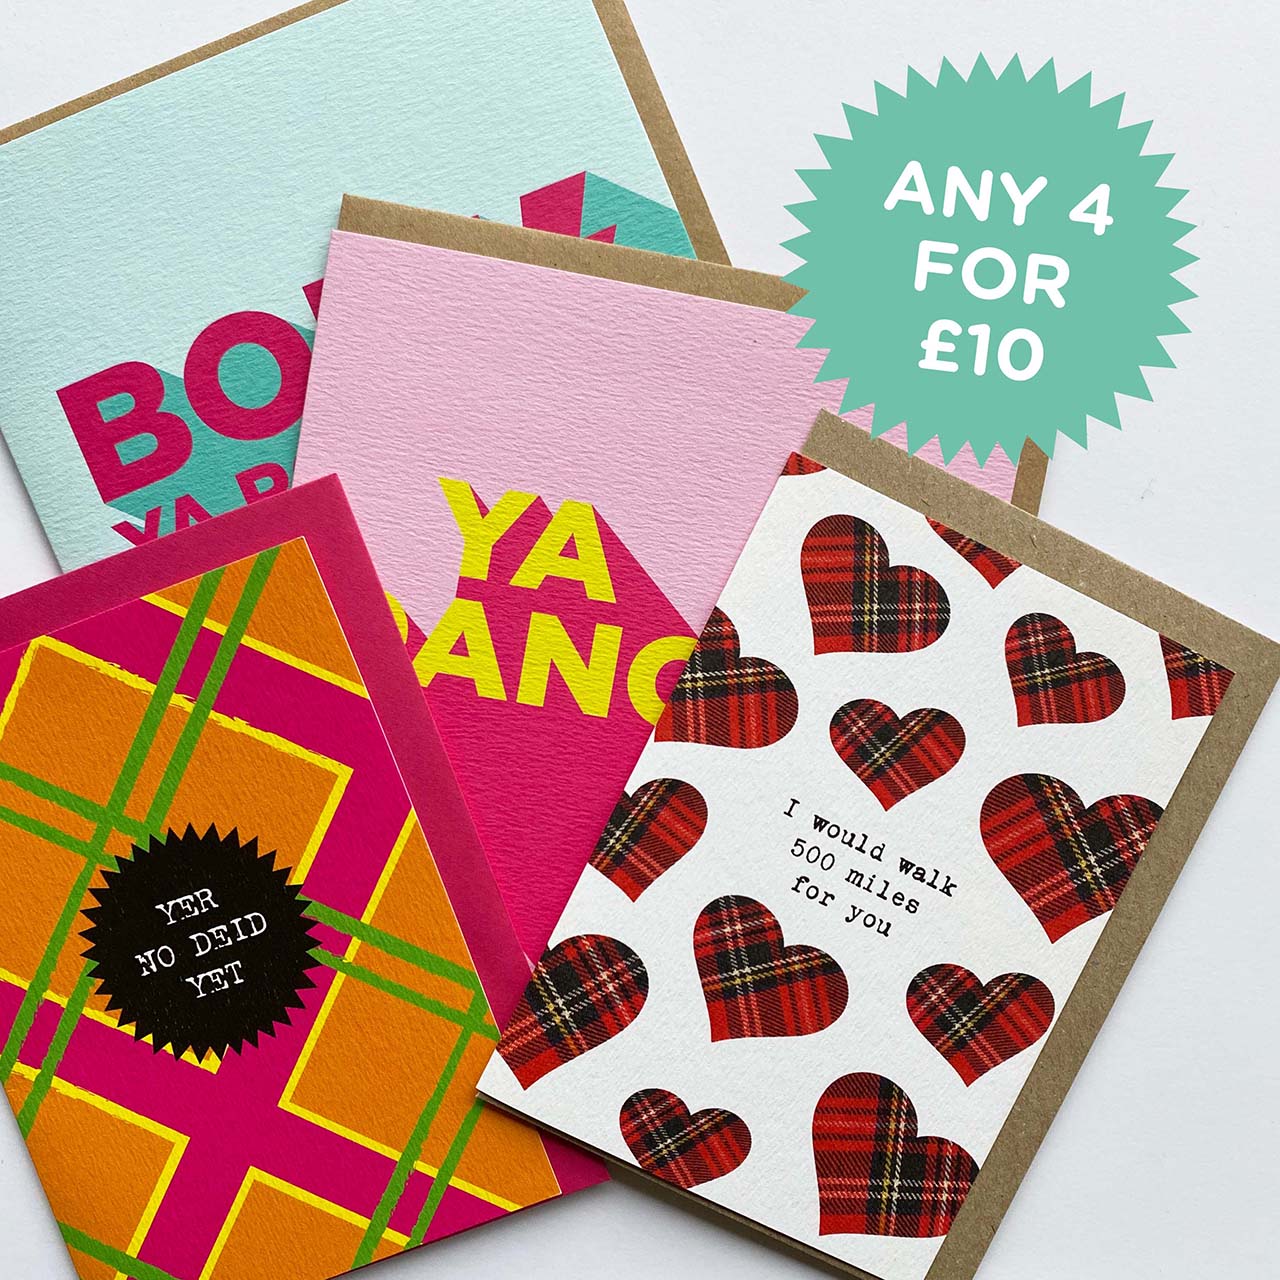 Scottish greeting cards with Scots wording and deal 4 for £10